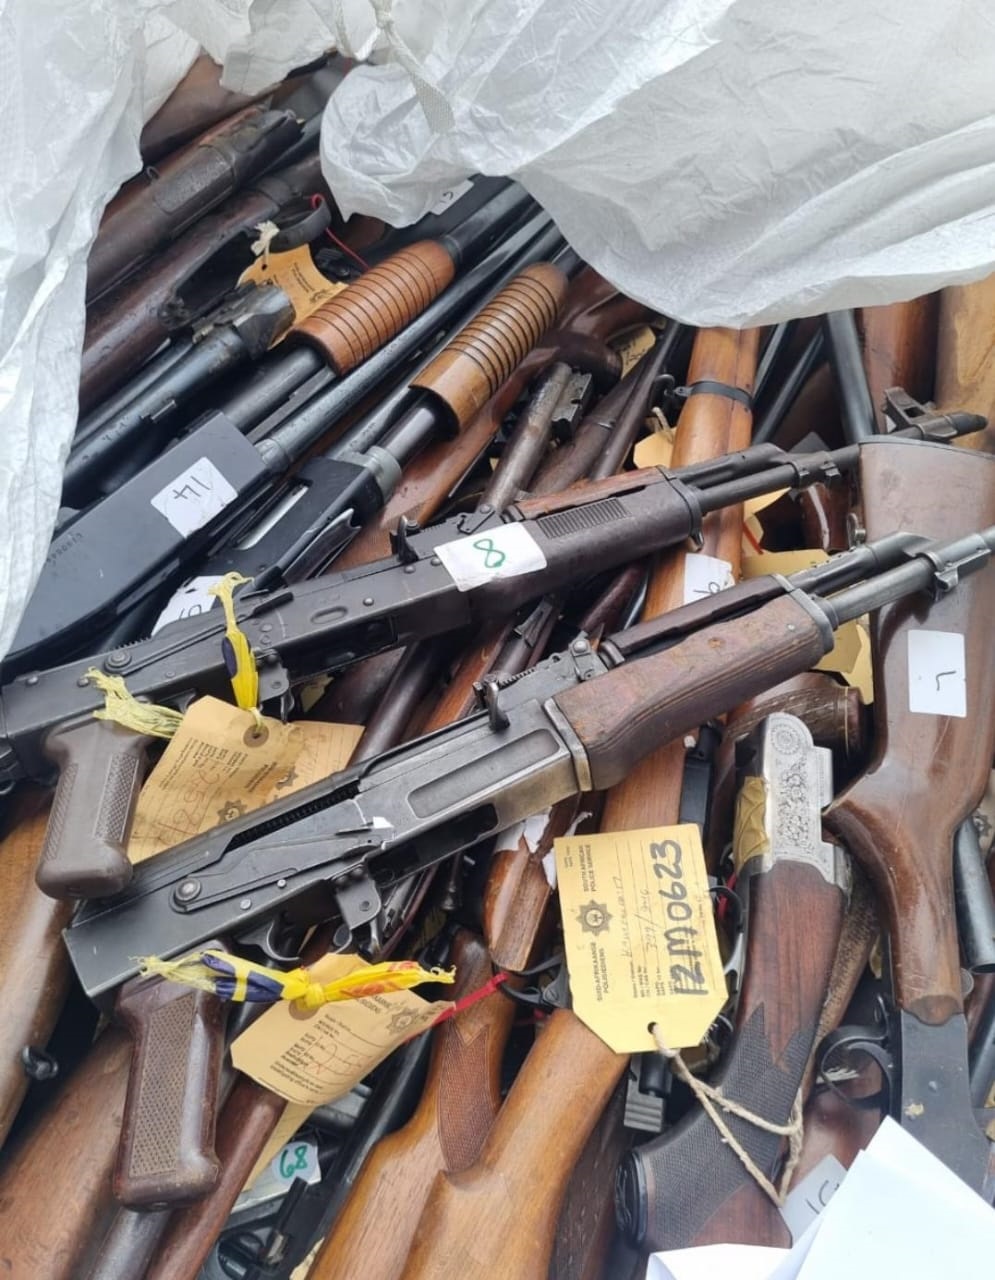 More than 18 000 illegal guns were destroyed by law enforcement agencies.